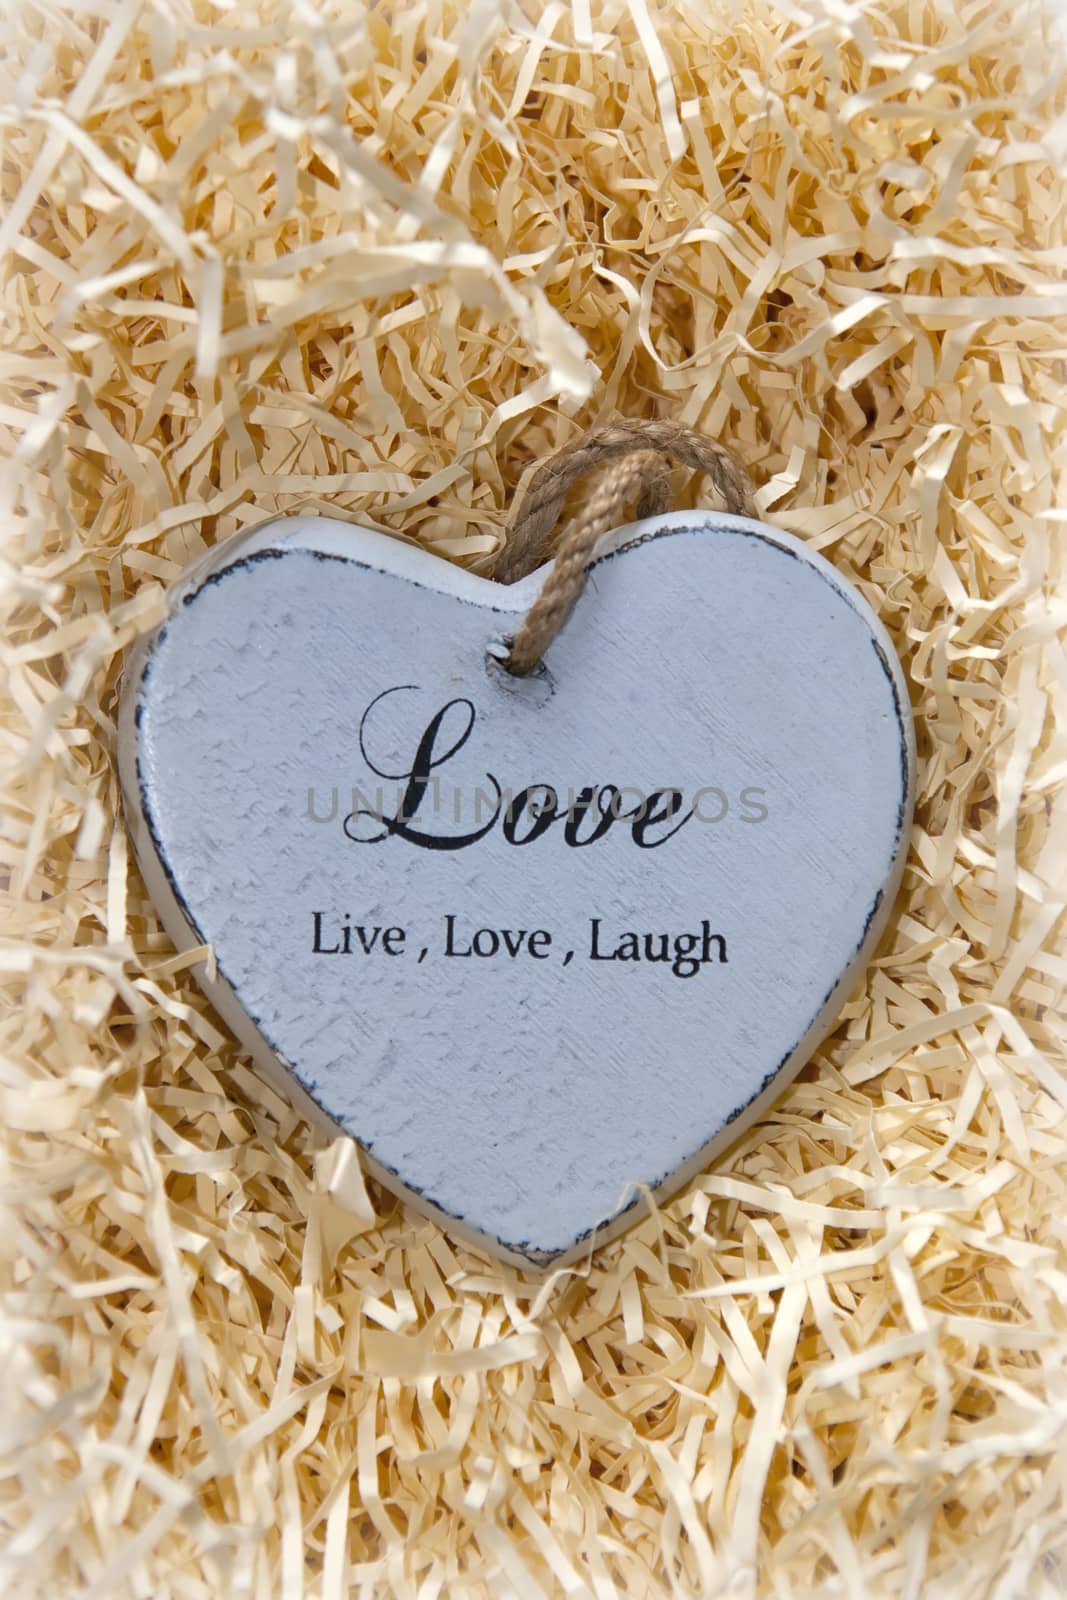 Live, love and laugh heart by morrbyte